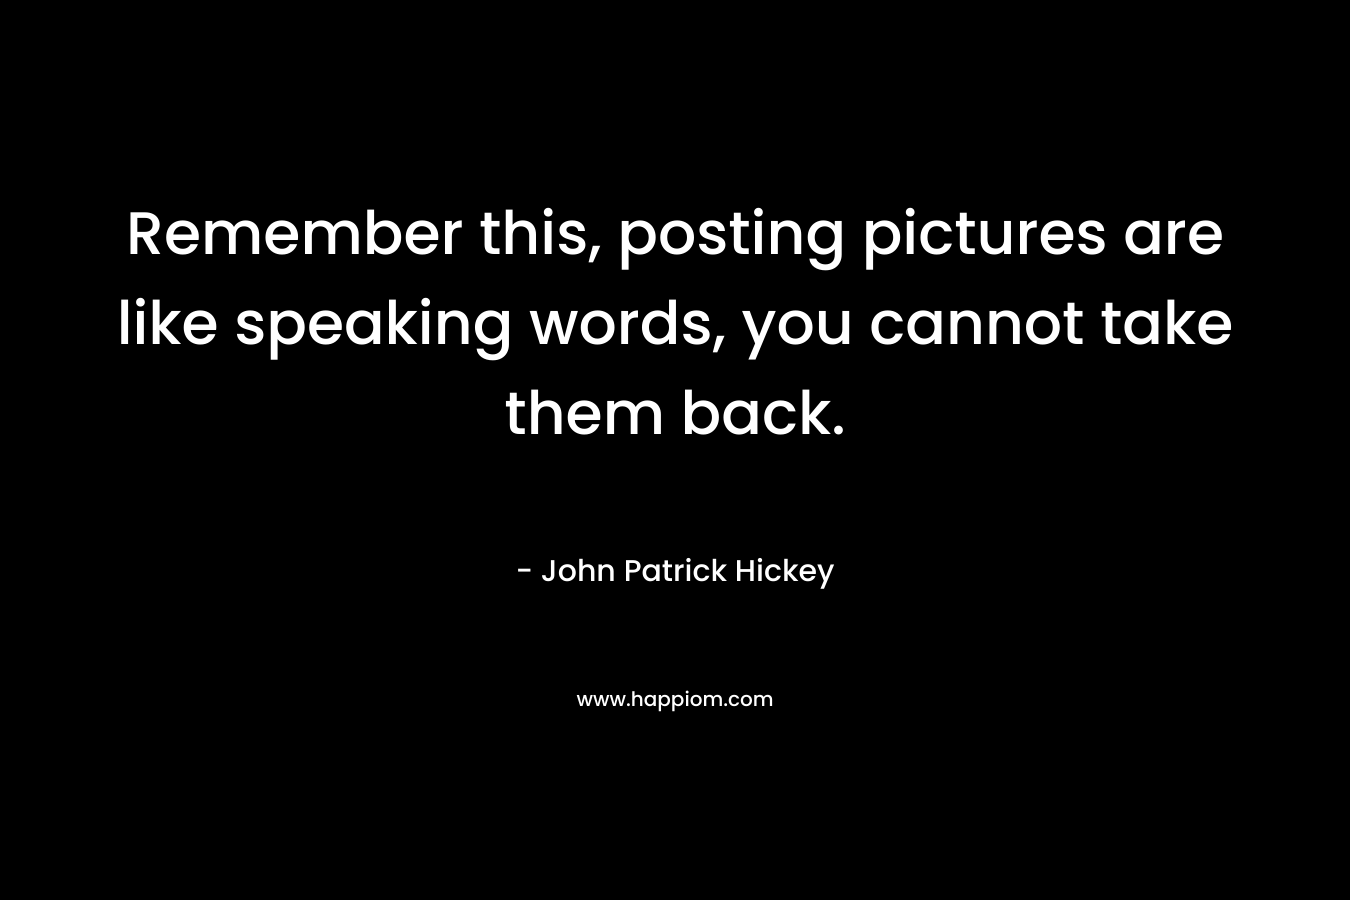 Remember this, posting pictures are like speaking words, you cannot take them back. – John Patrick Hickey